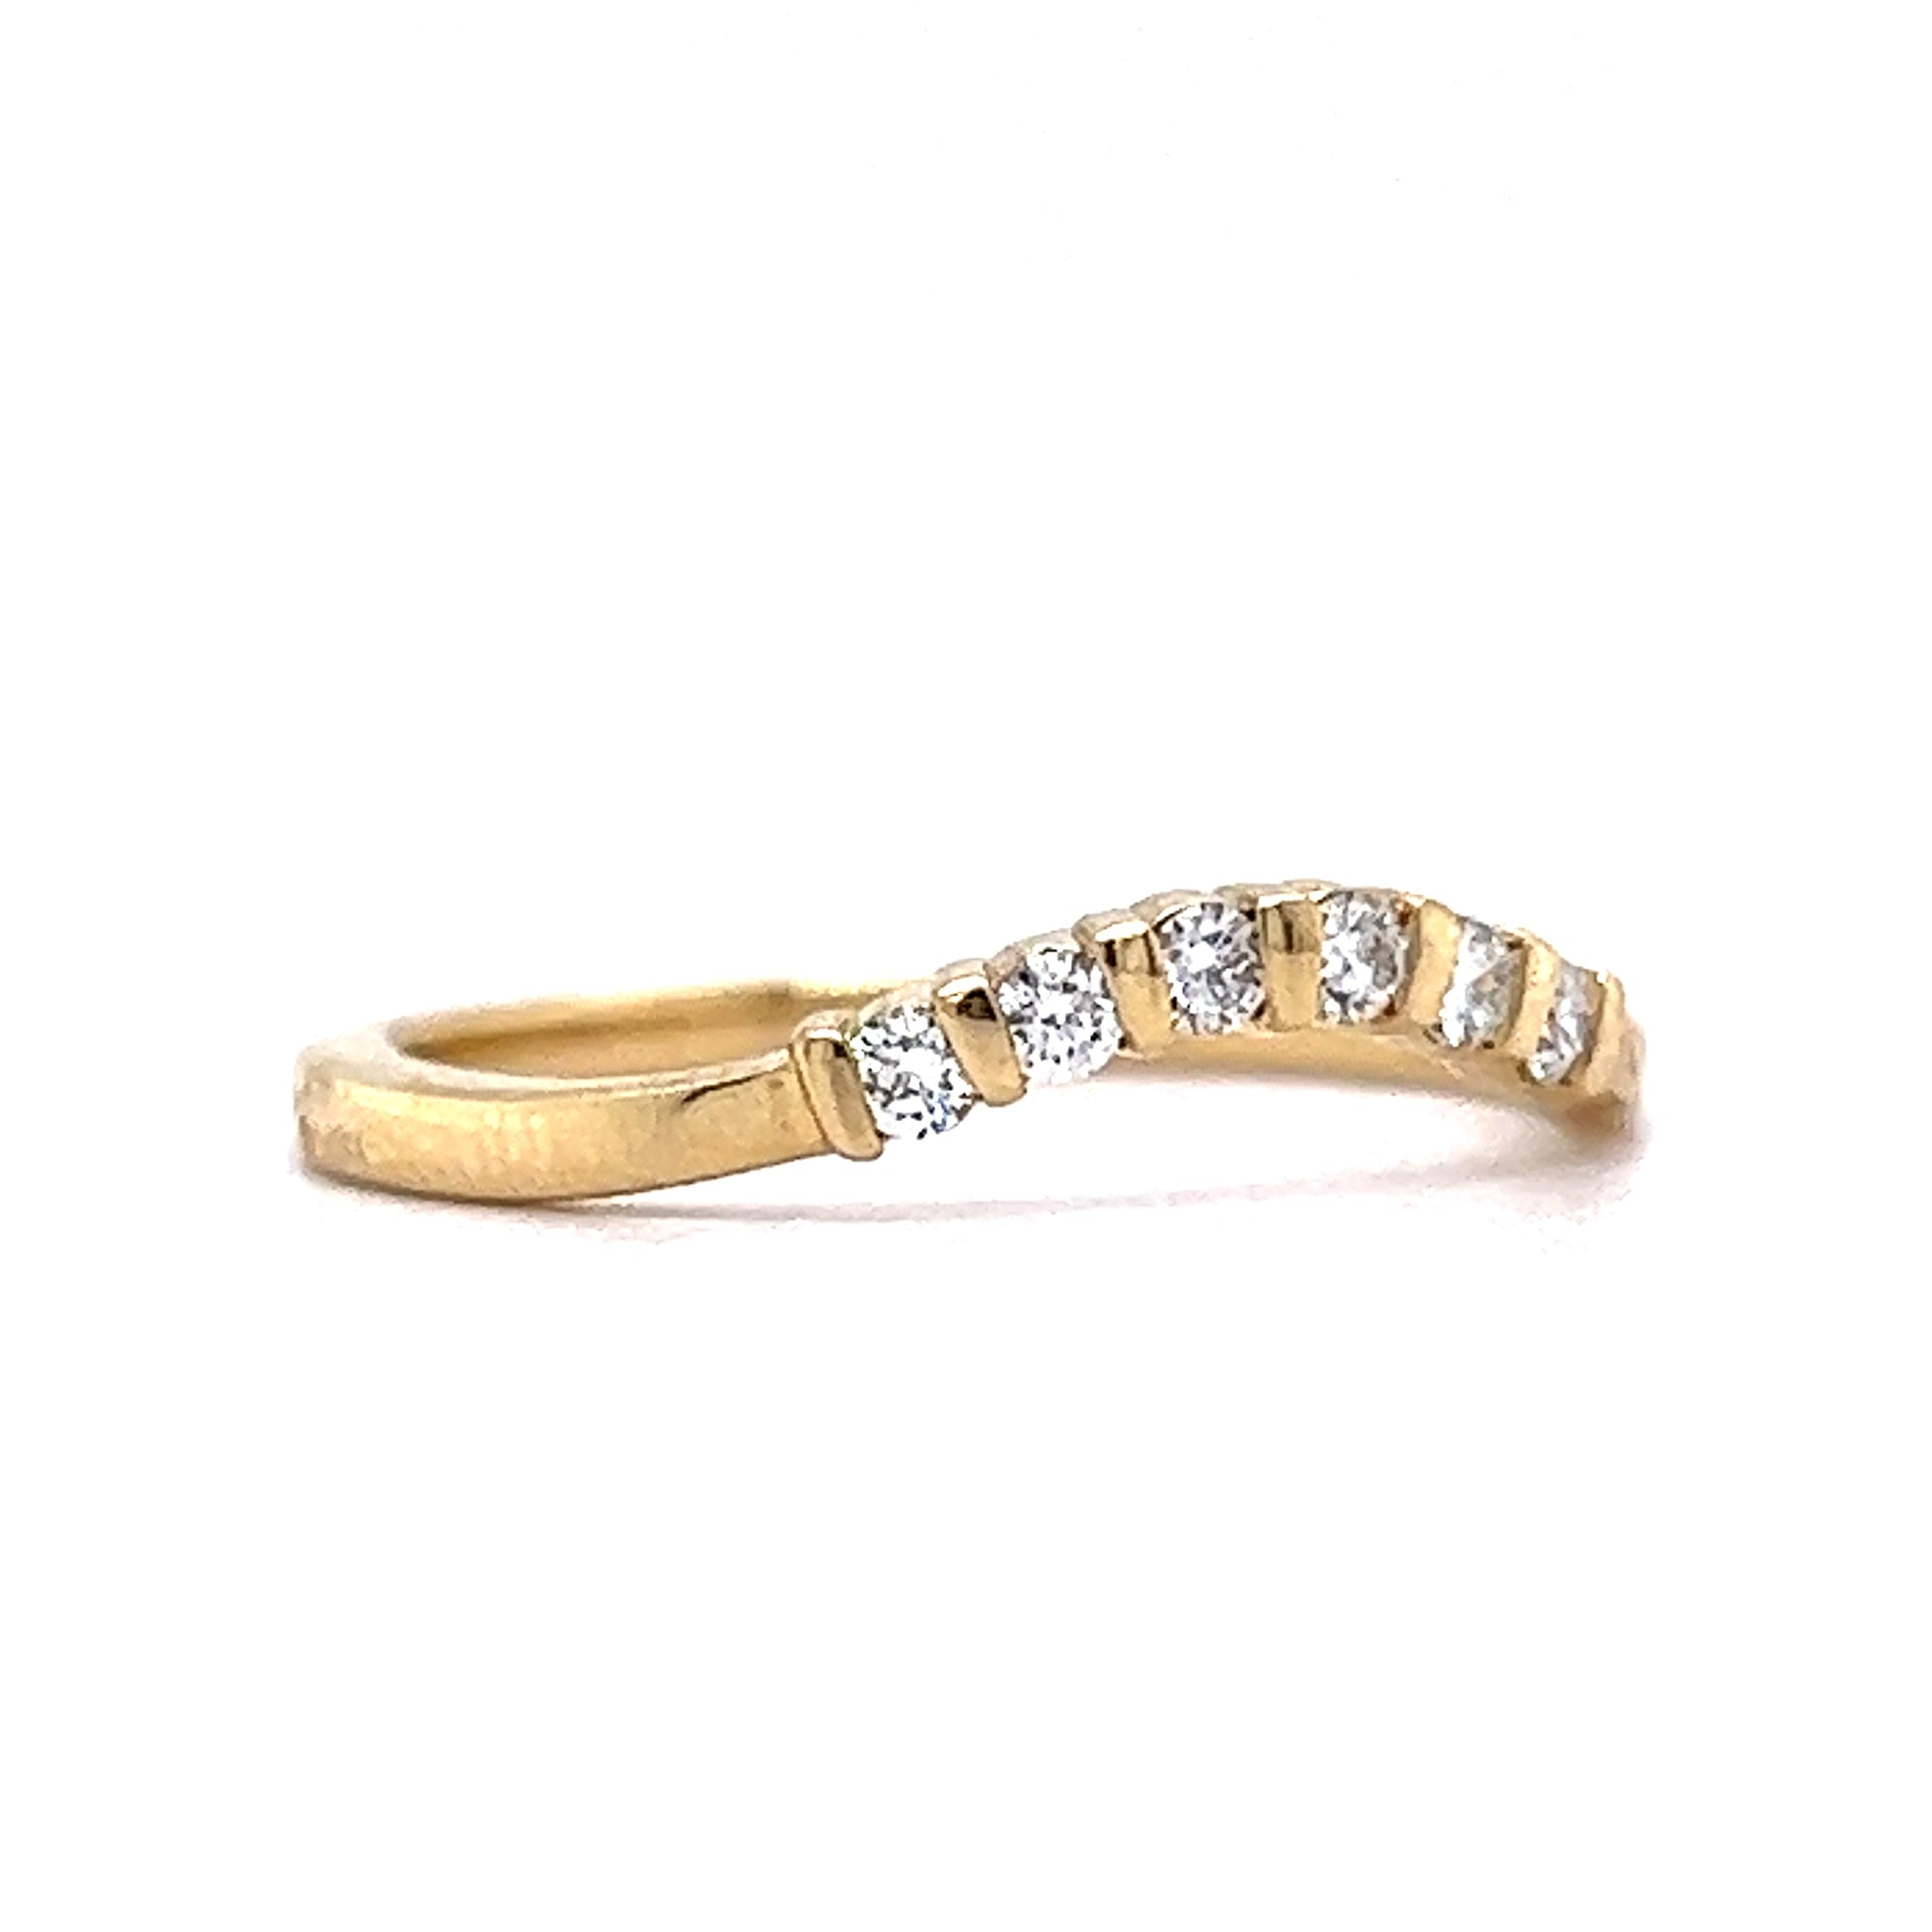 .18 Round Diamond Contoured Wedding Band in Yellow GoldComposition: 14 Karat Yellow Gold Ring Size: 7.0 Total Diamond Weight: .18ct Total Gram Weight: 2.0 g Inscription: 14k
      